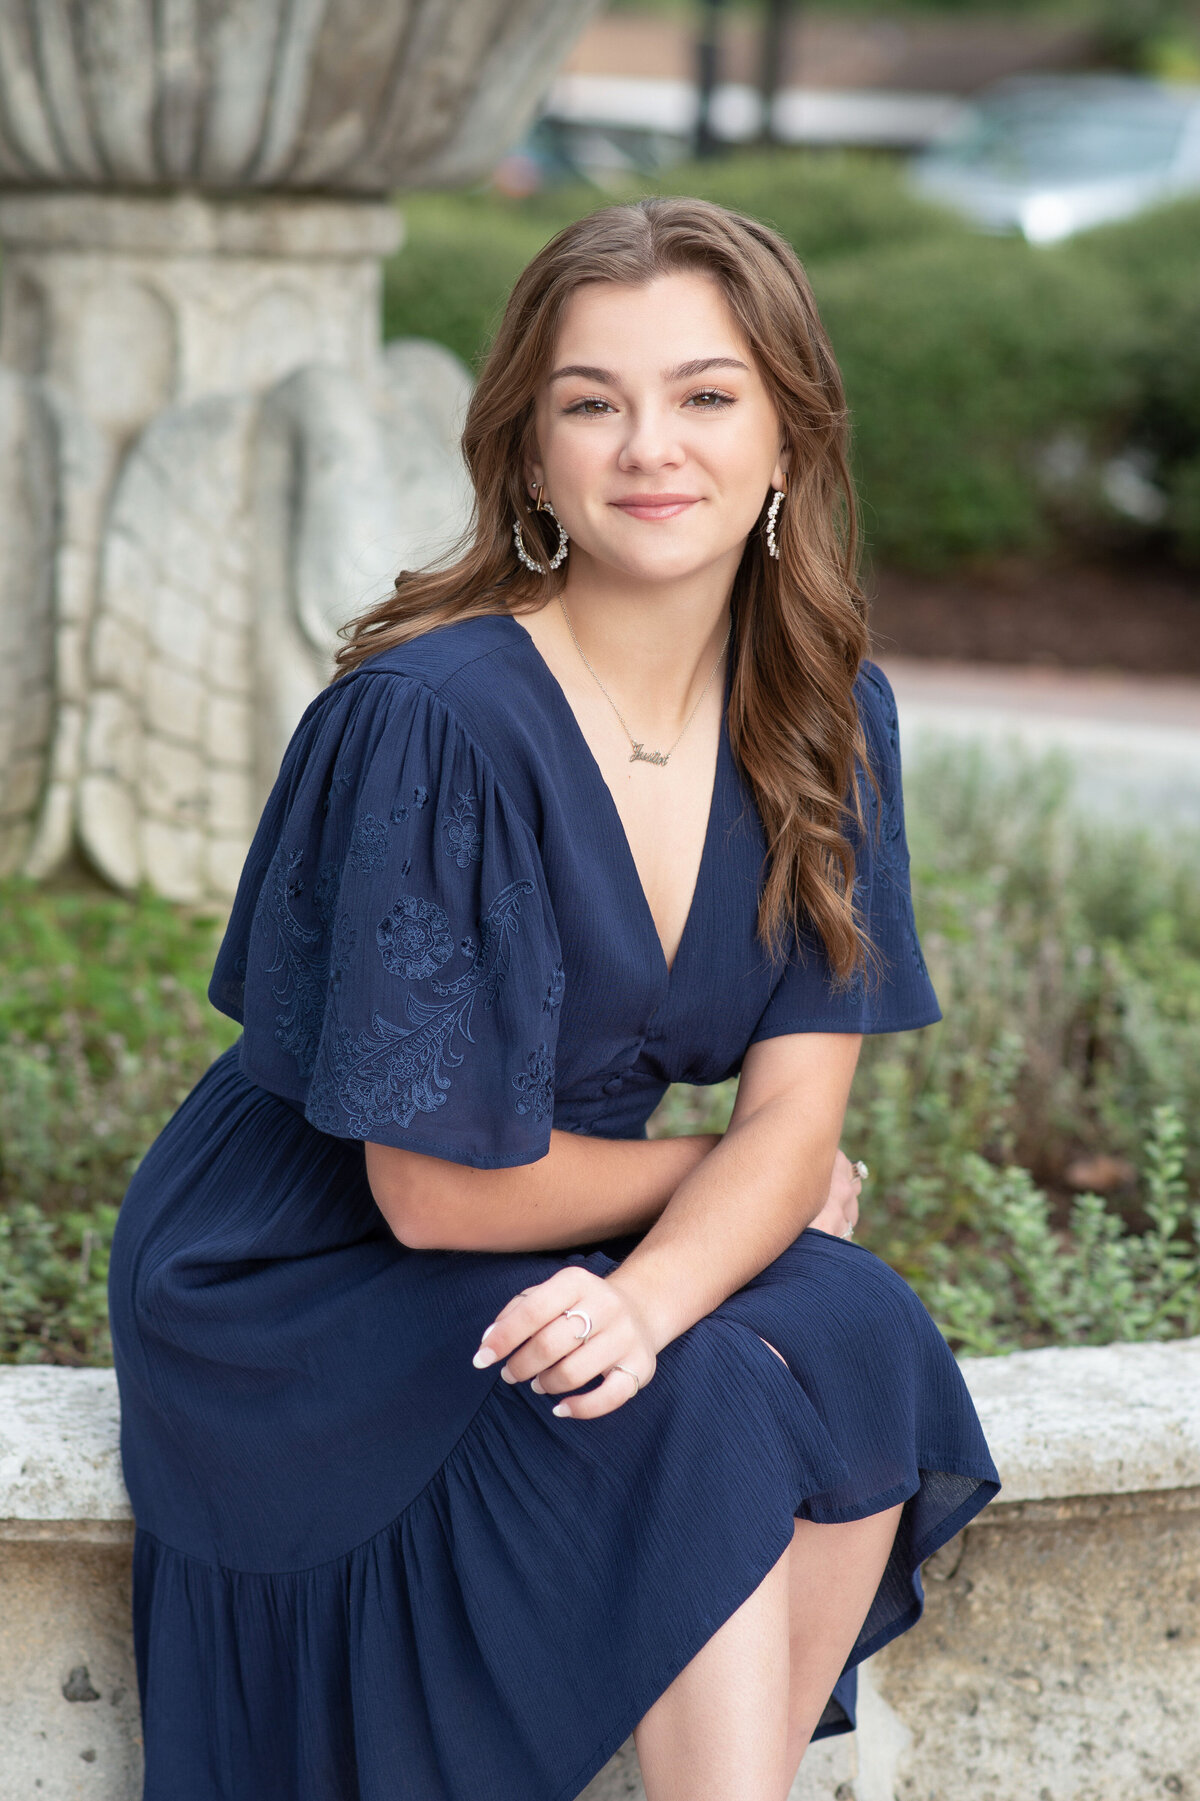 High school senior girl in a blue dress sits on ledge of fountain.